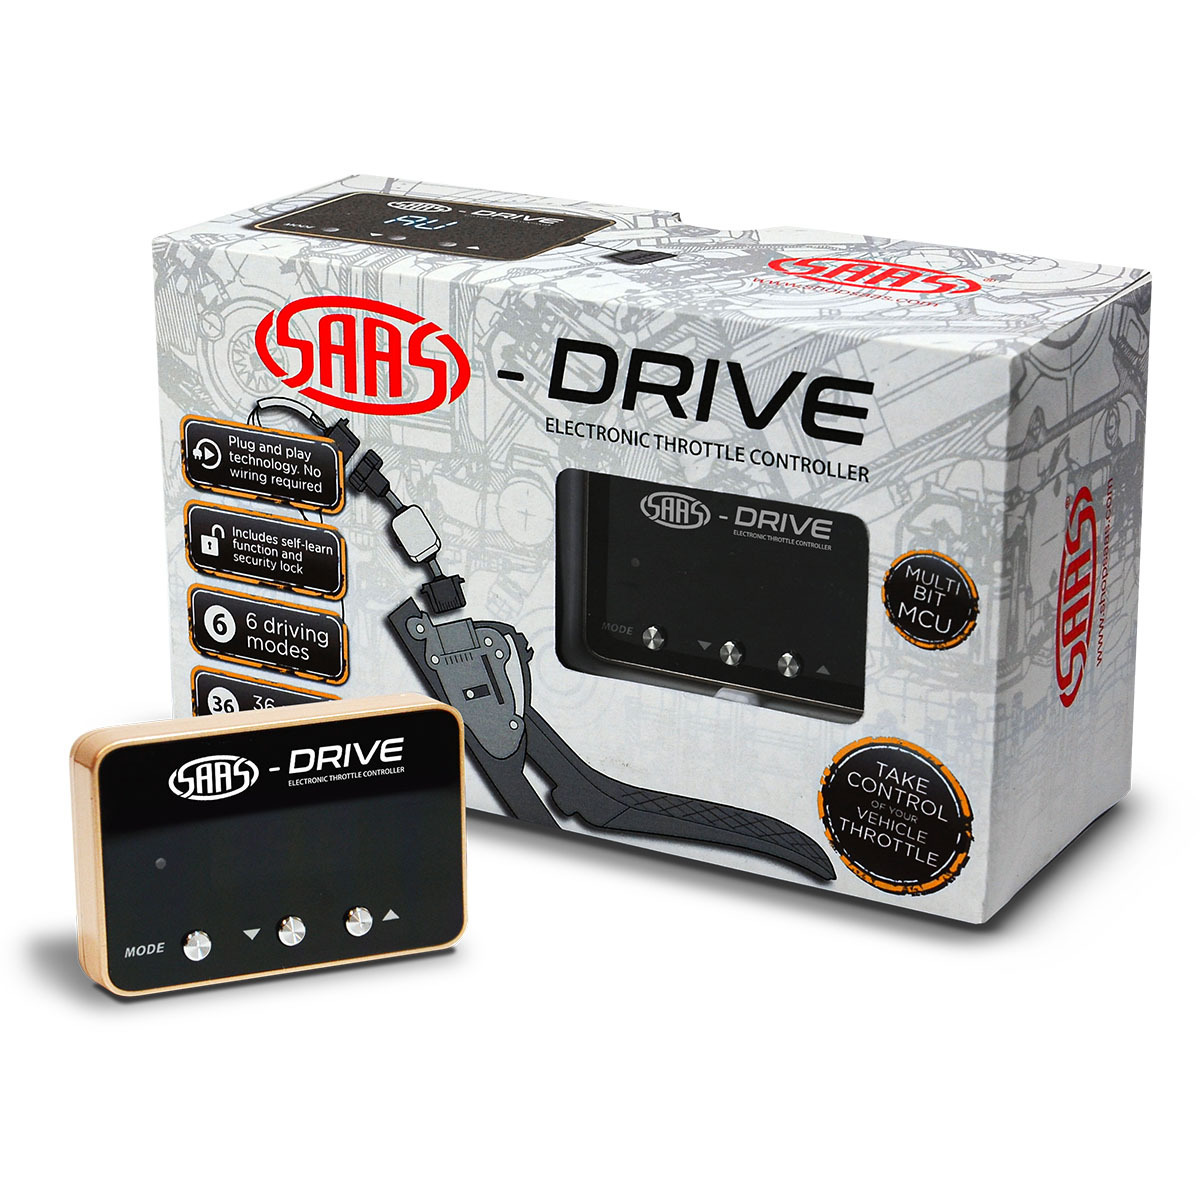 SAAS-Drive Ford F150 Raptor 2010 - 2014 Throttle Controller 